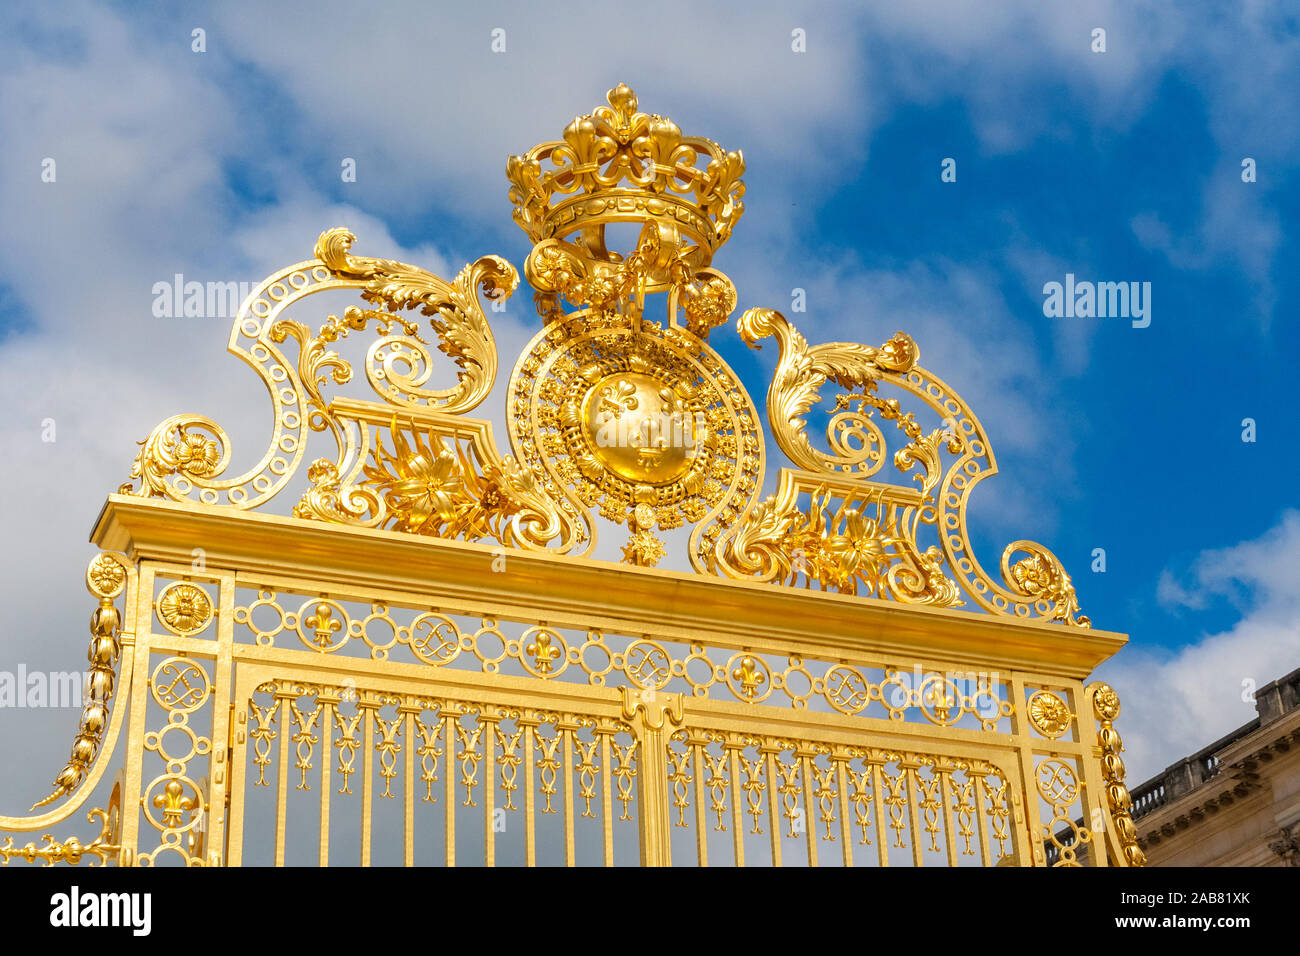 Perfect close-up view of the shiny golden Royal Gate, an elaborate gold leaf gate, seen from the Cour d'Honneur at the famous Palace of Versailles on... Stock Photo